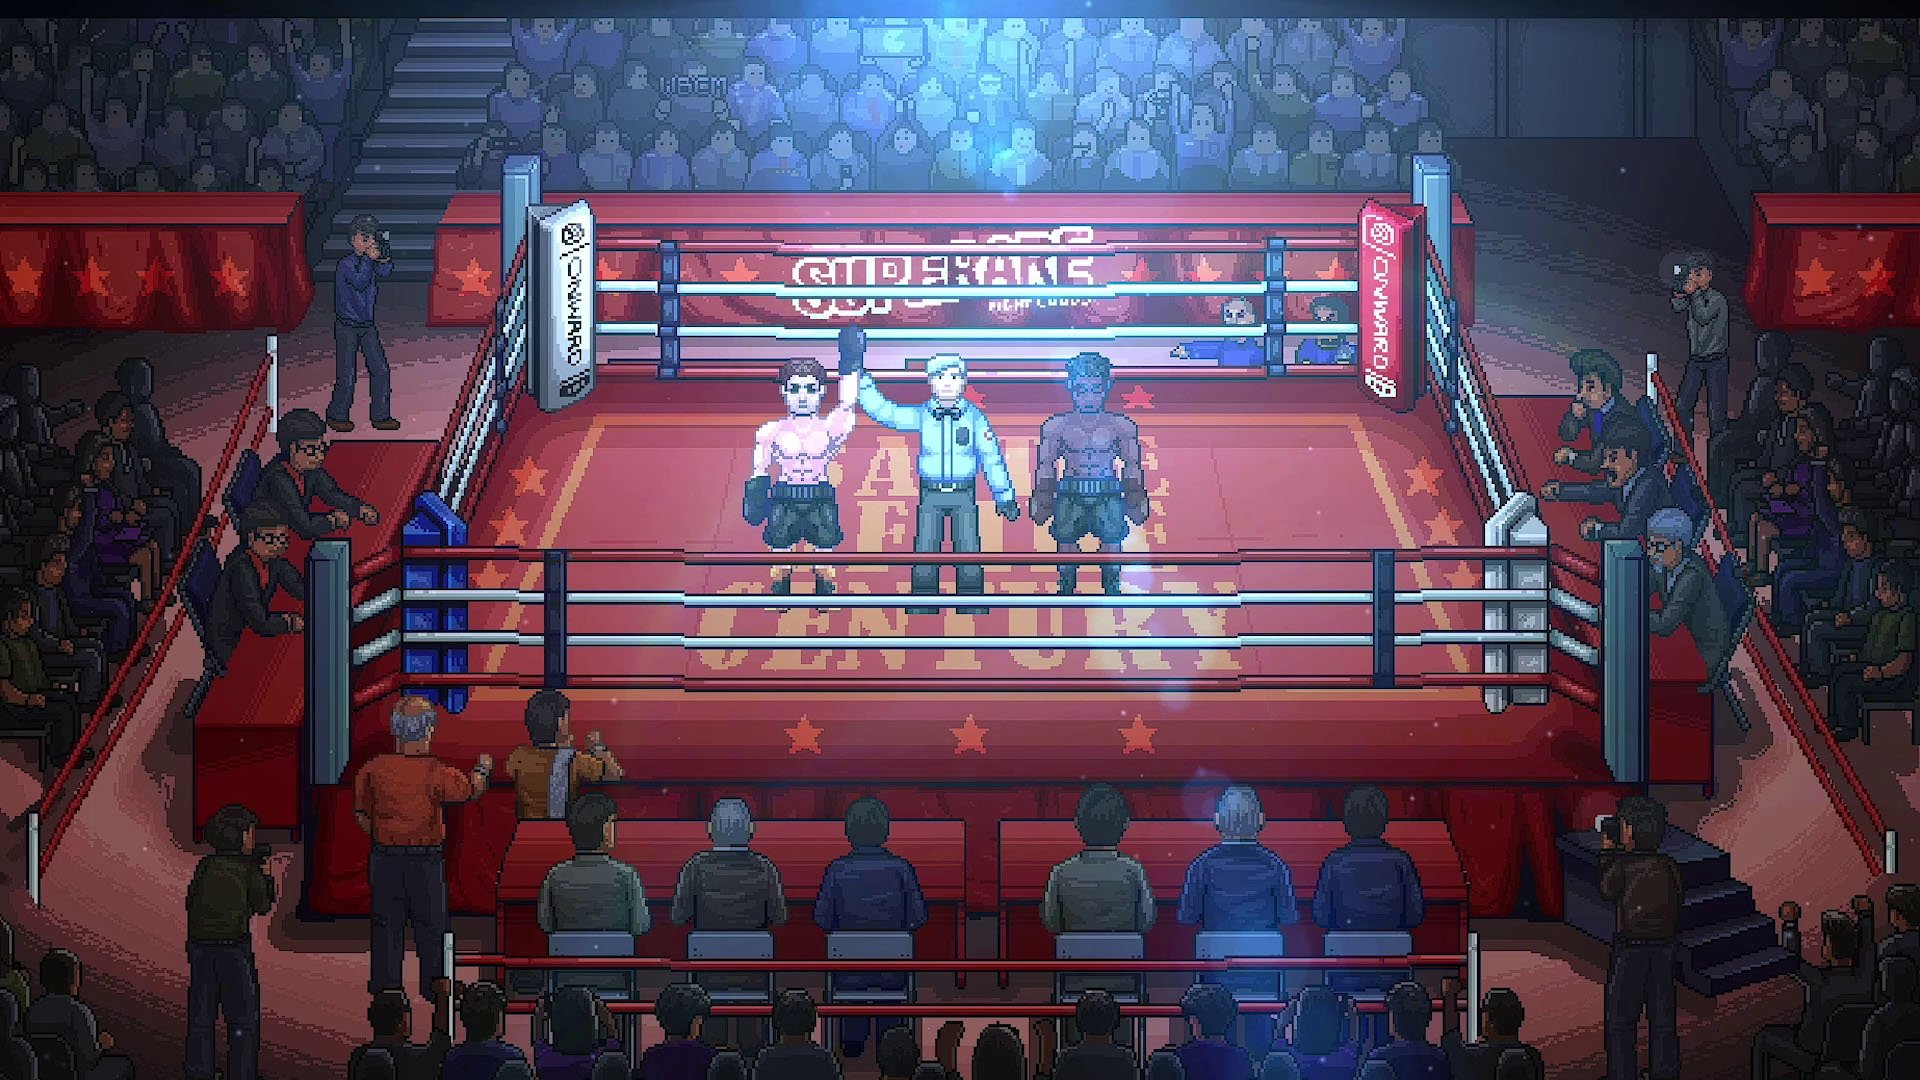 Duck! Dodge! Weave! Fight! - World Championship Boxing Manager 2 Launches  on Console 